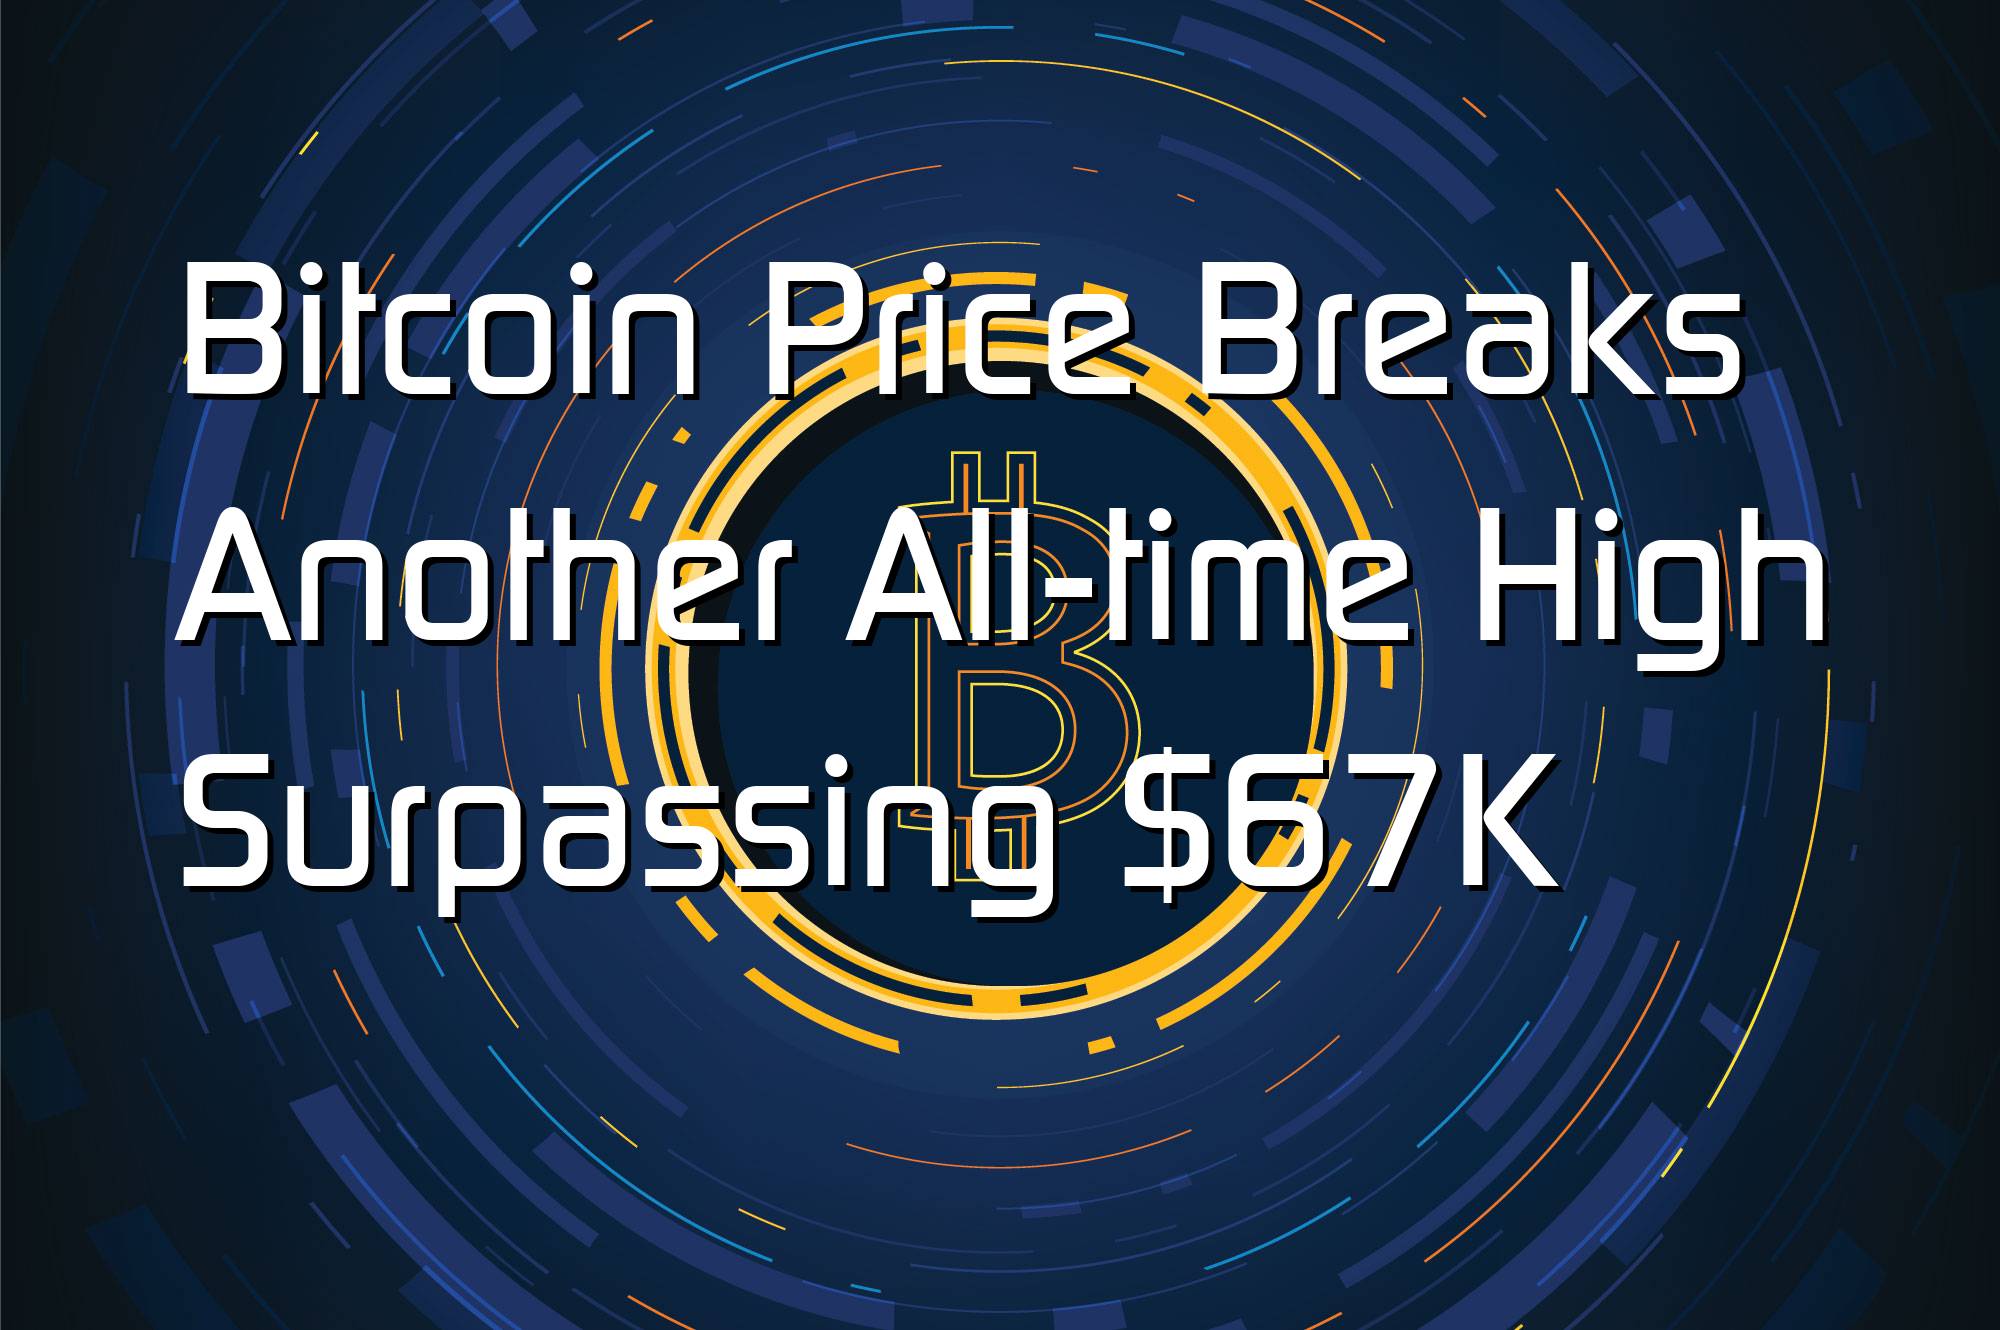 @$68020: Bitcoin Price Breaks Another All-time High Surpassing $67K